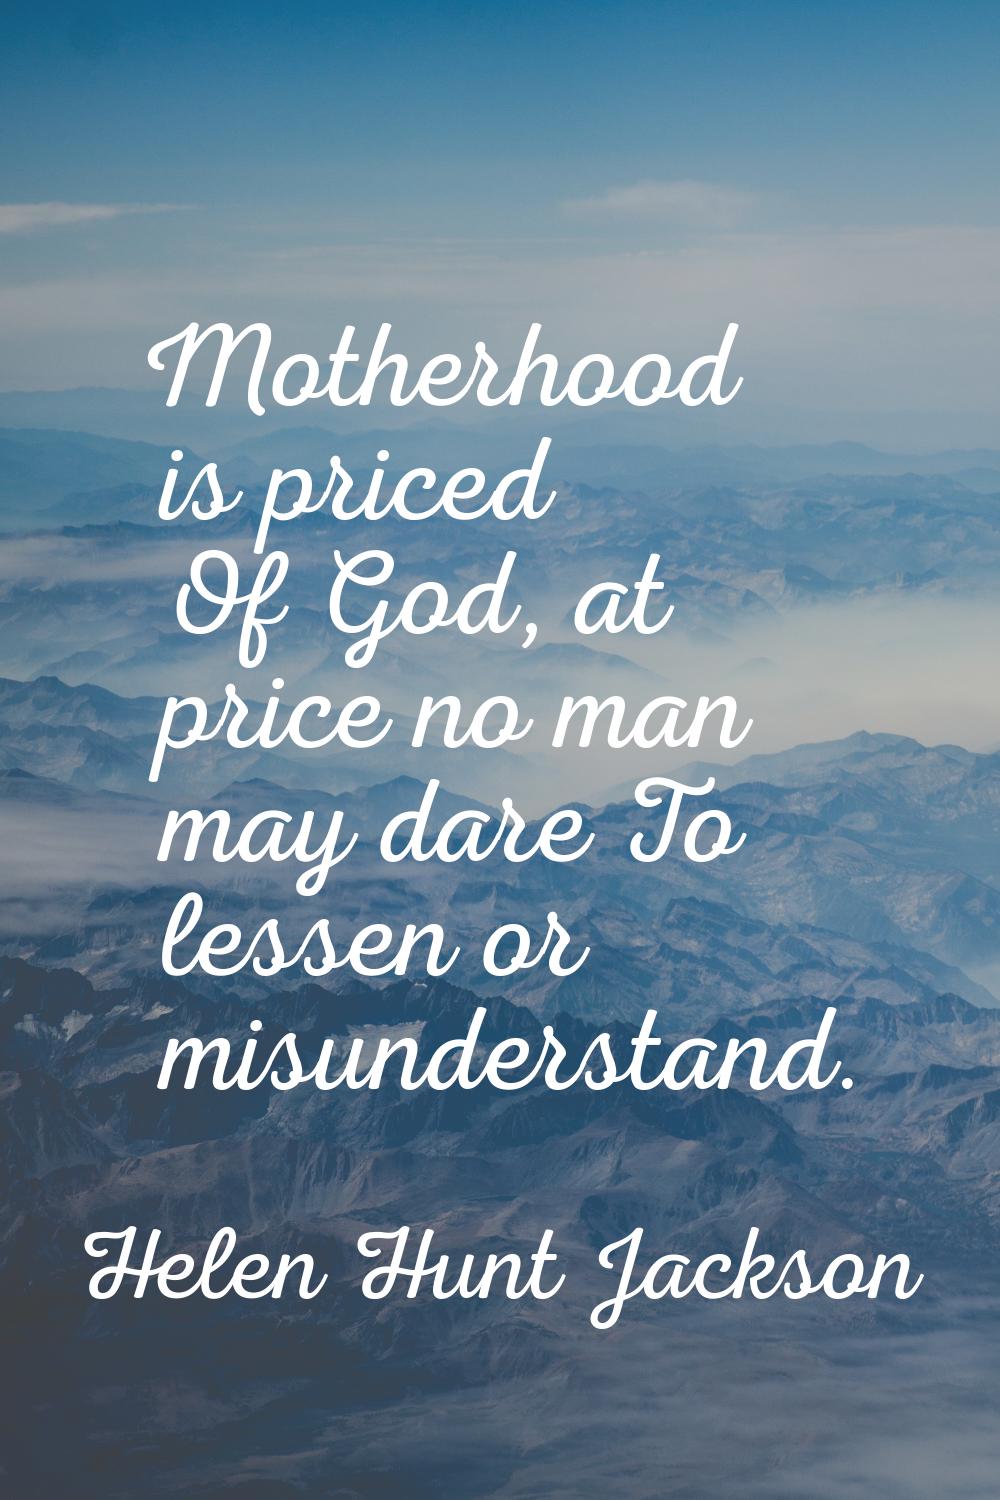 Motherhood is priced Of God, at price no man may dare To lessen or misunderstand.